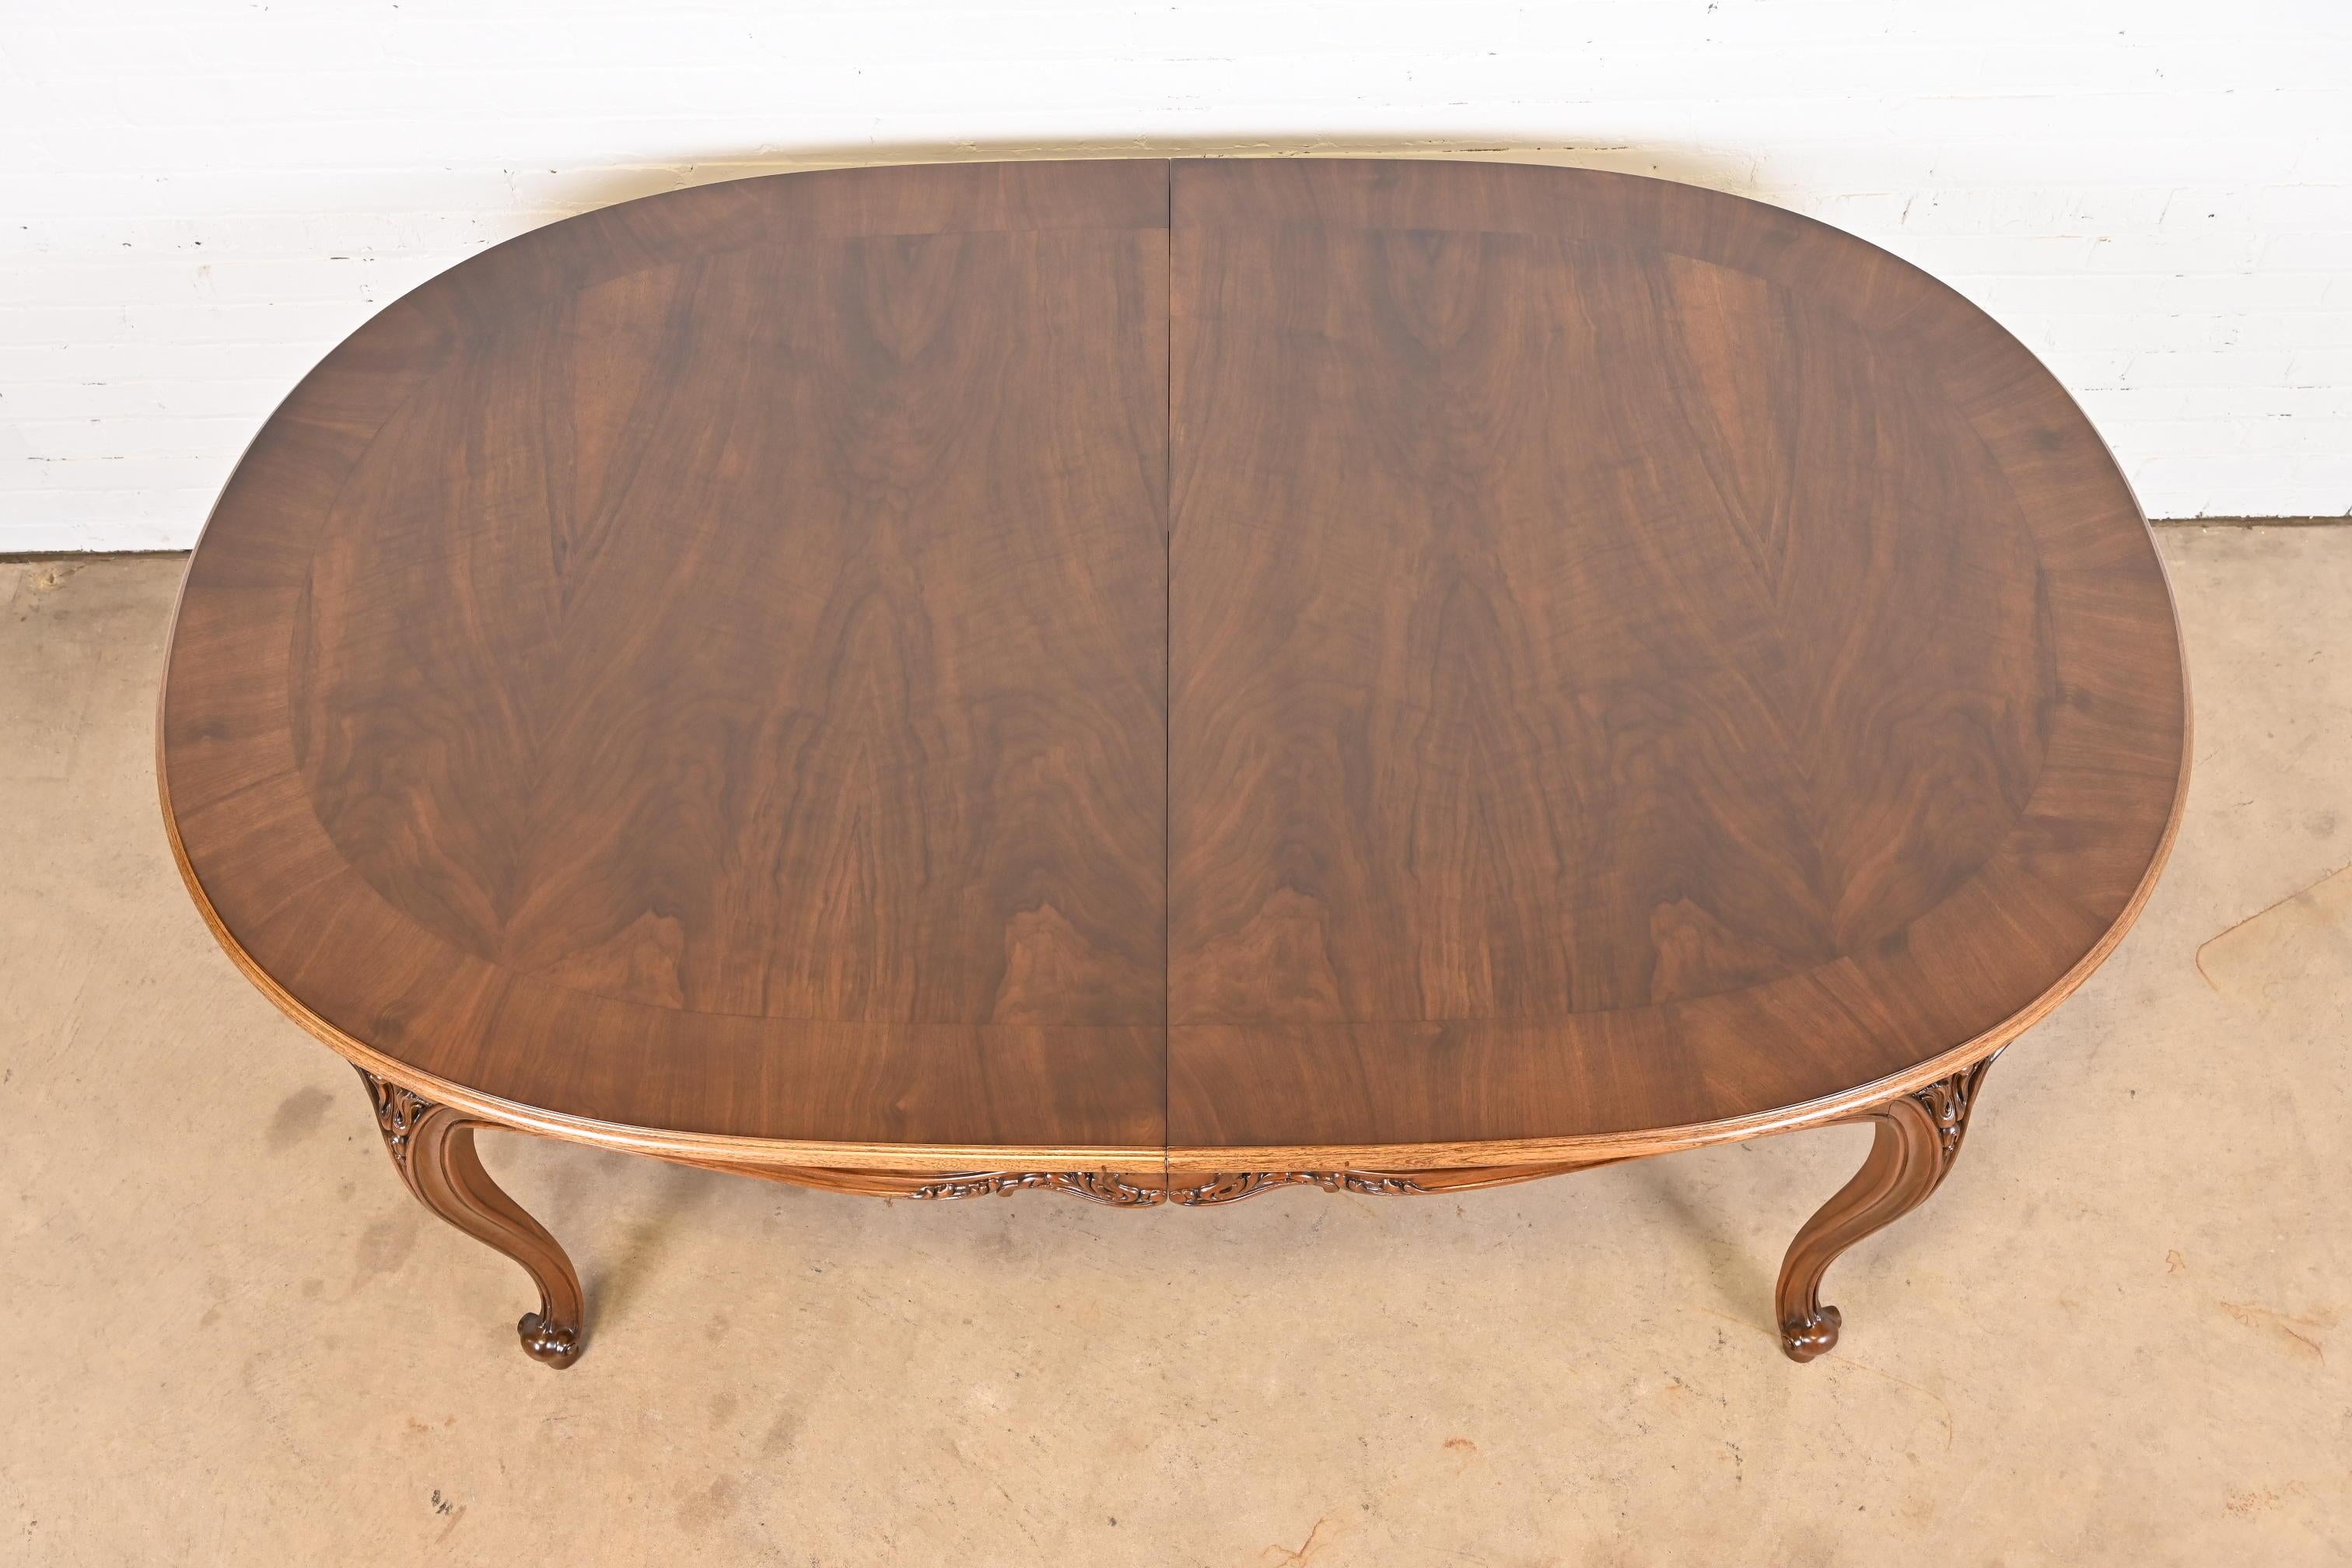 Karges French Provincial Louis XV Burled Walnut Dining Table, Newly Refinished 11